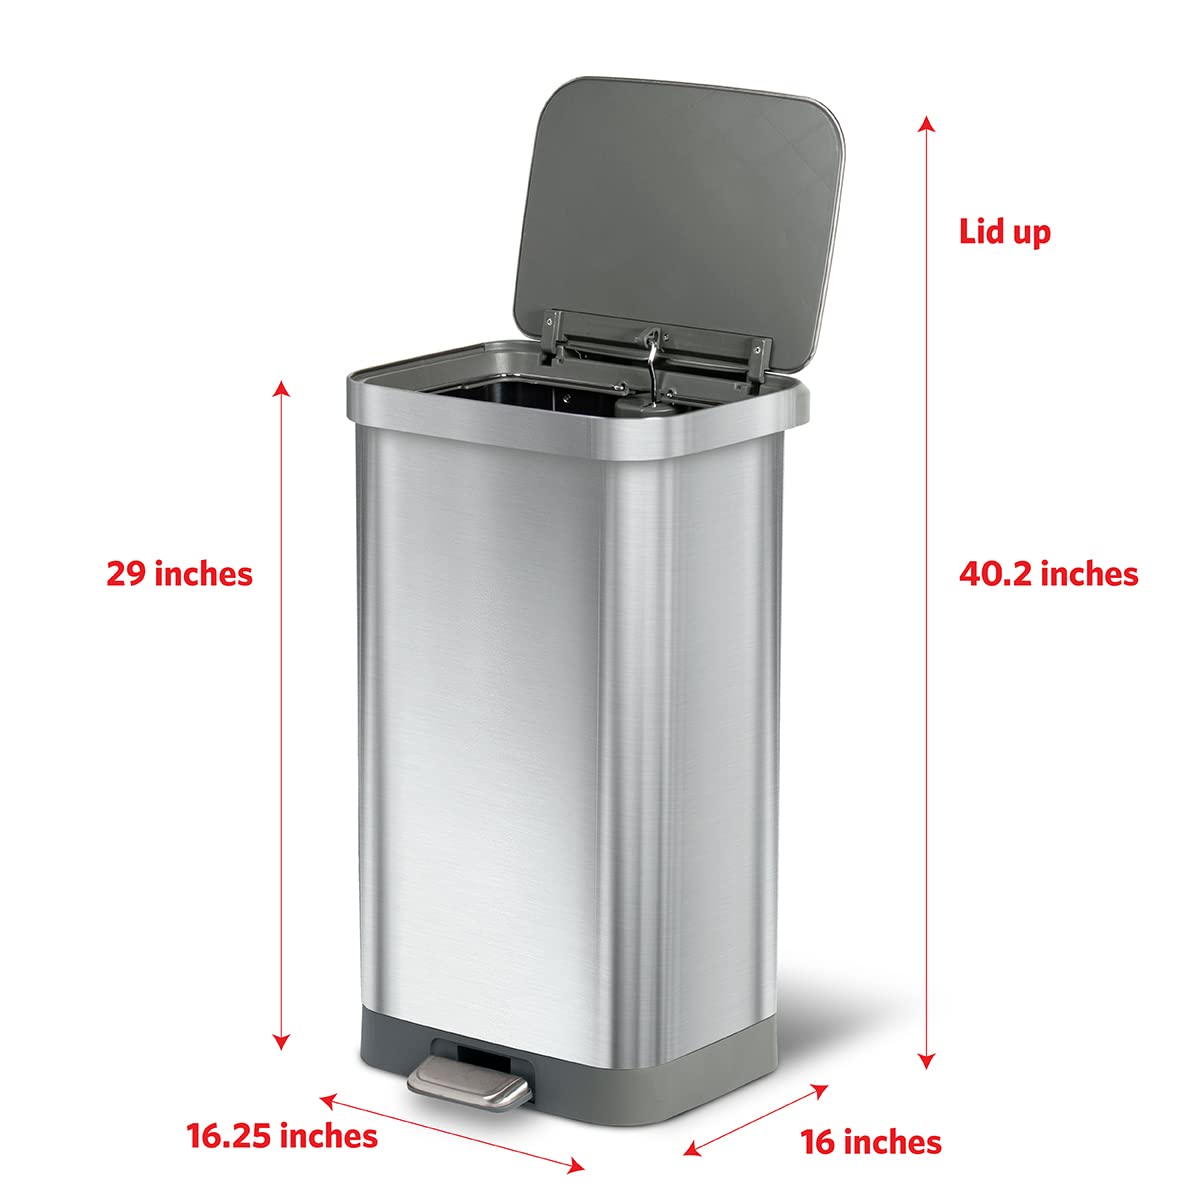 https://bigbigmart.com/wp-content/uploads/2023/07/Glad-Stainless-Steel-Step-Trash-Can-with-Clorox-Odor-Protection-Large-Metal-Kitchen-Garbage-Bin-with-Soft-Close-Lid-Foot-Pedal-and-Waste-Bag-Roll-Holder-20-Gallon-All-Stainless2.jpg